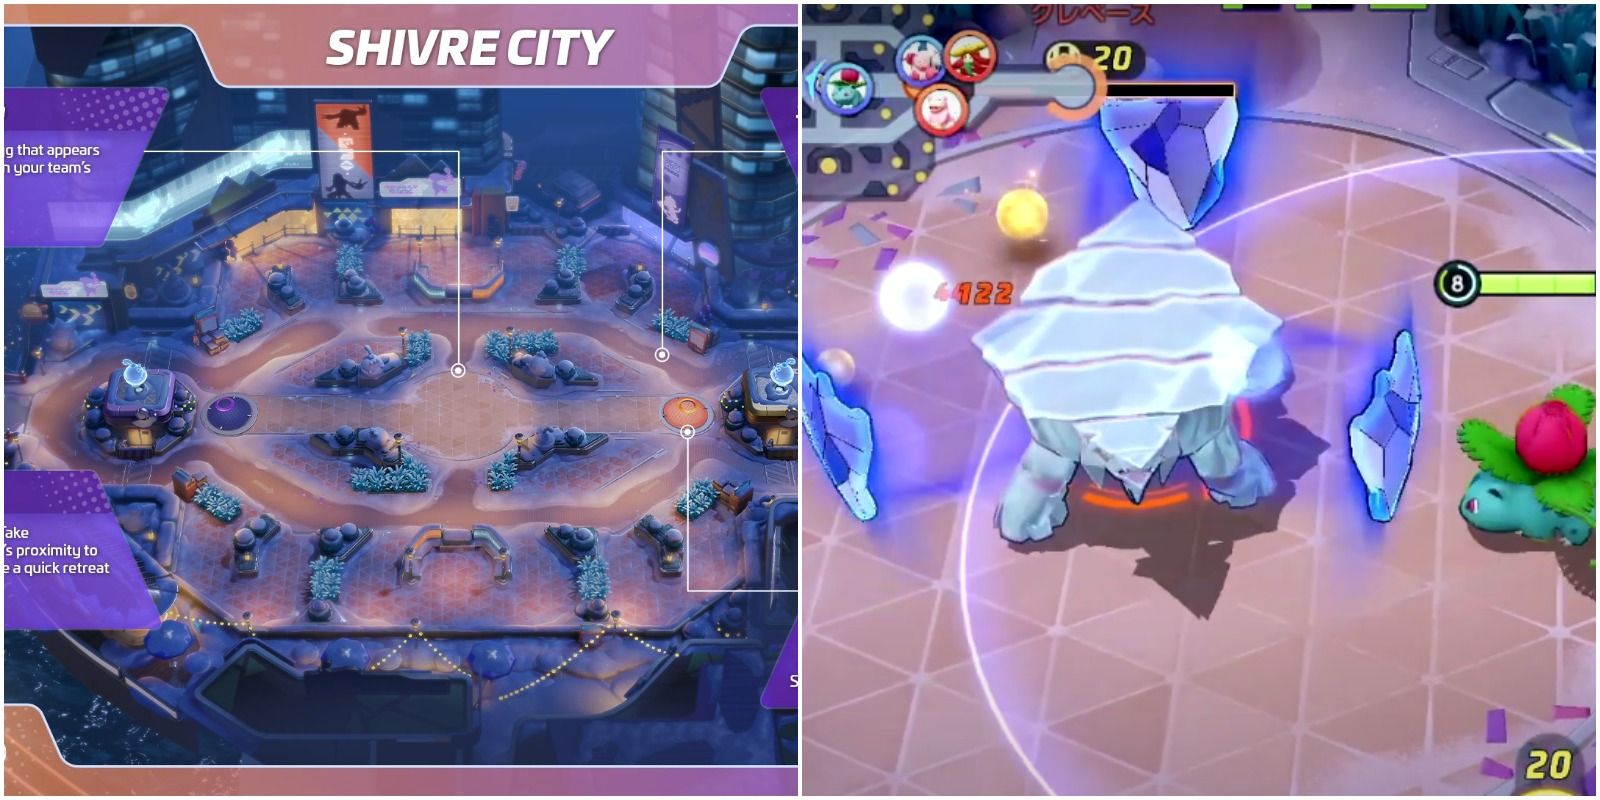 crop of the shivre city map and avalugg in battle.